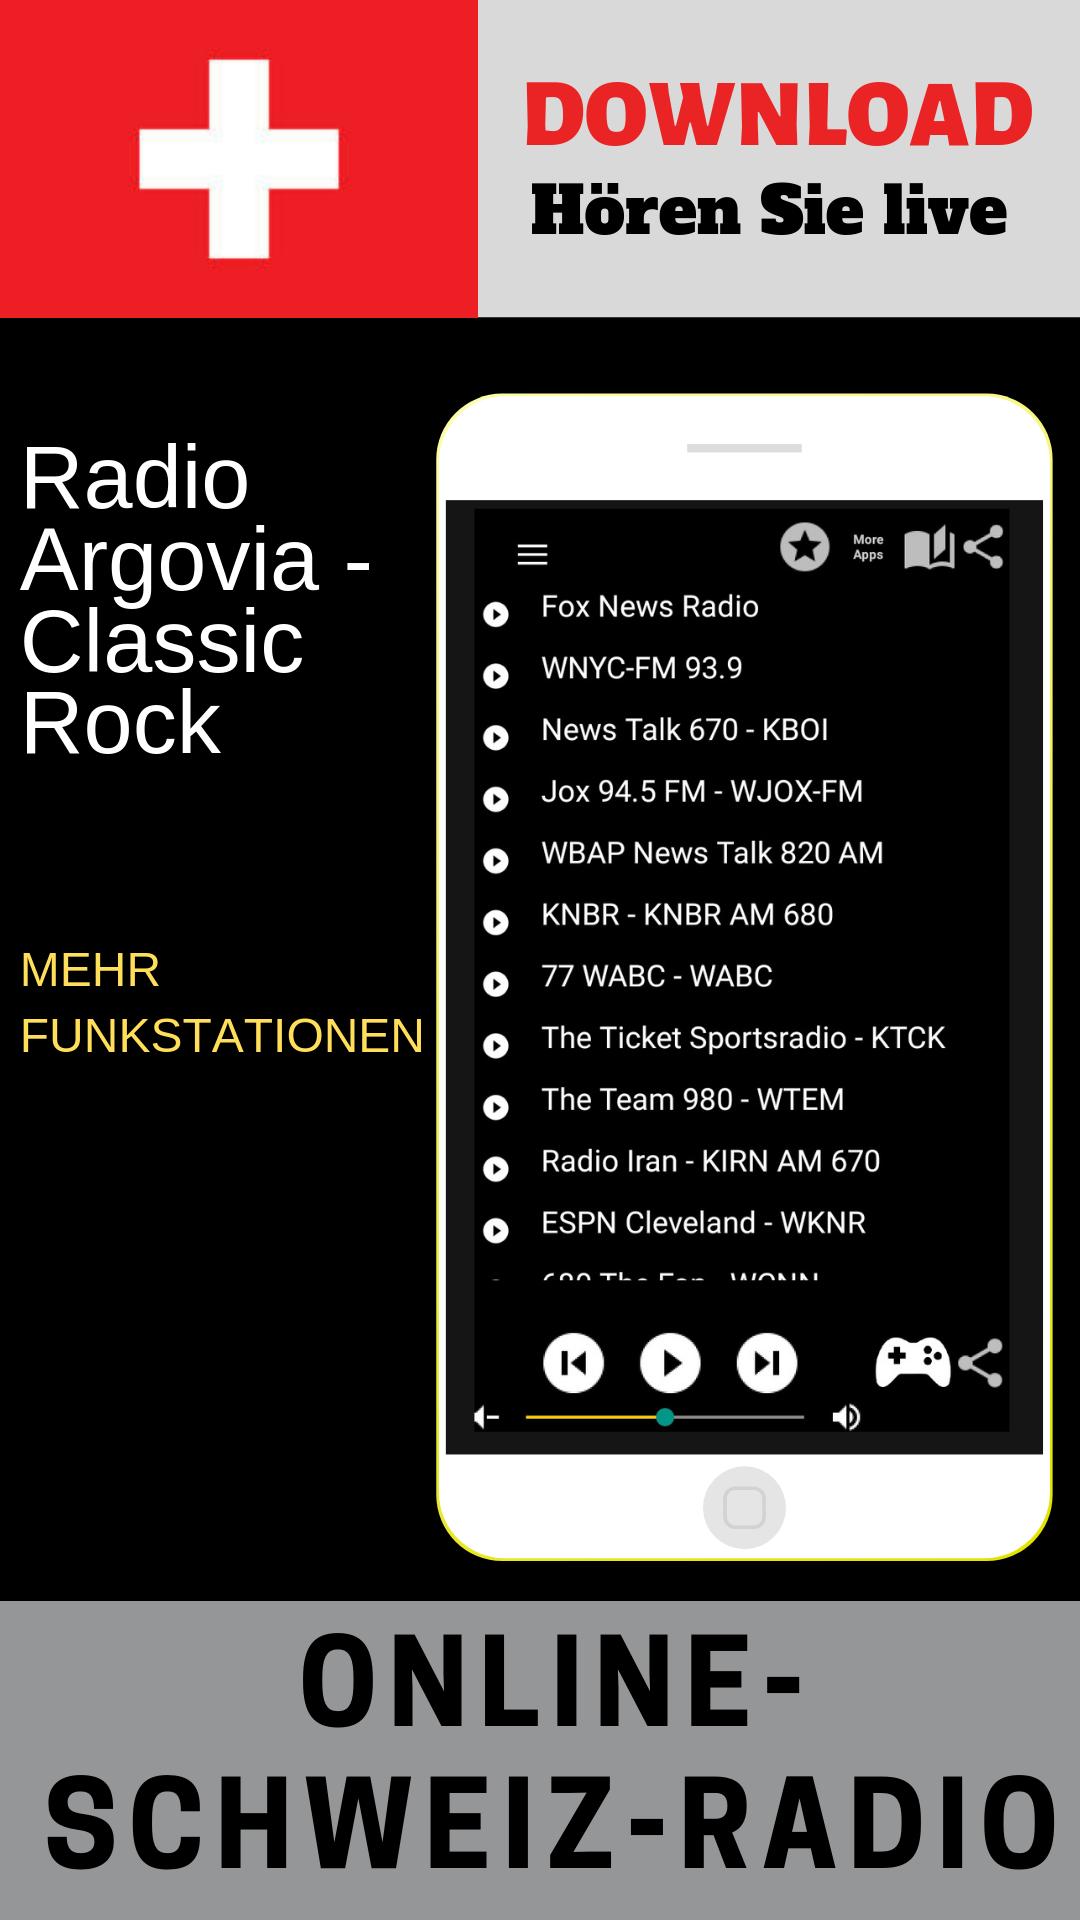 Radio Argovia - Classic Rock Free Online for Android - APK Download